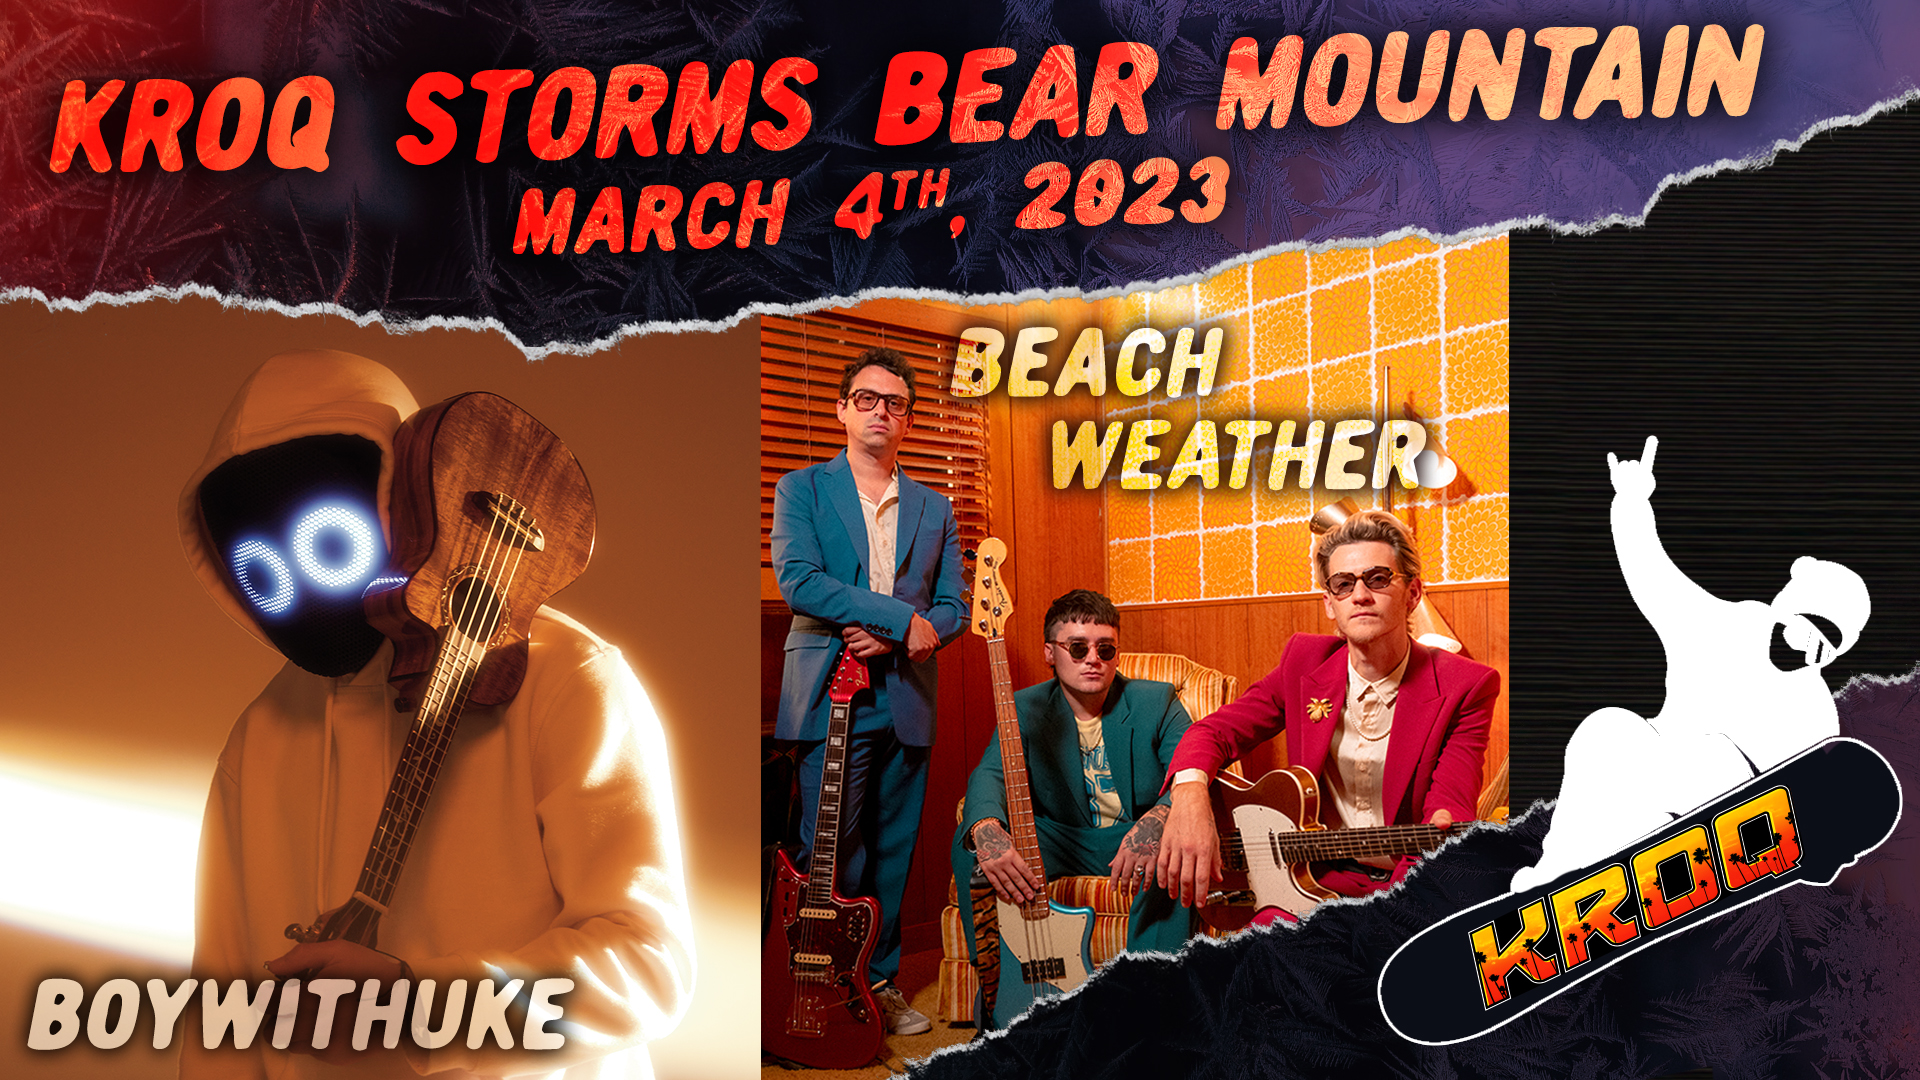 KROQ Storms Bear Mountain on March 4, 2023